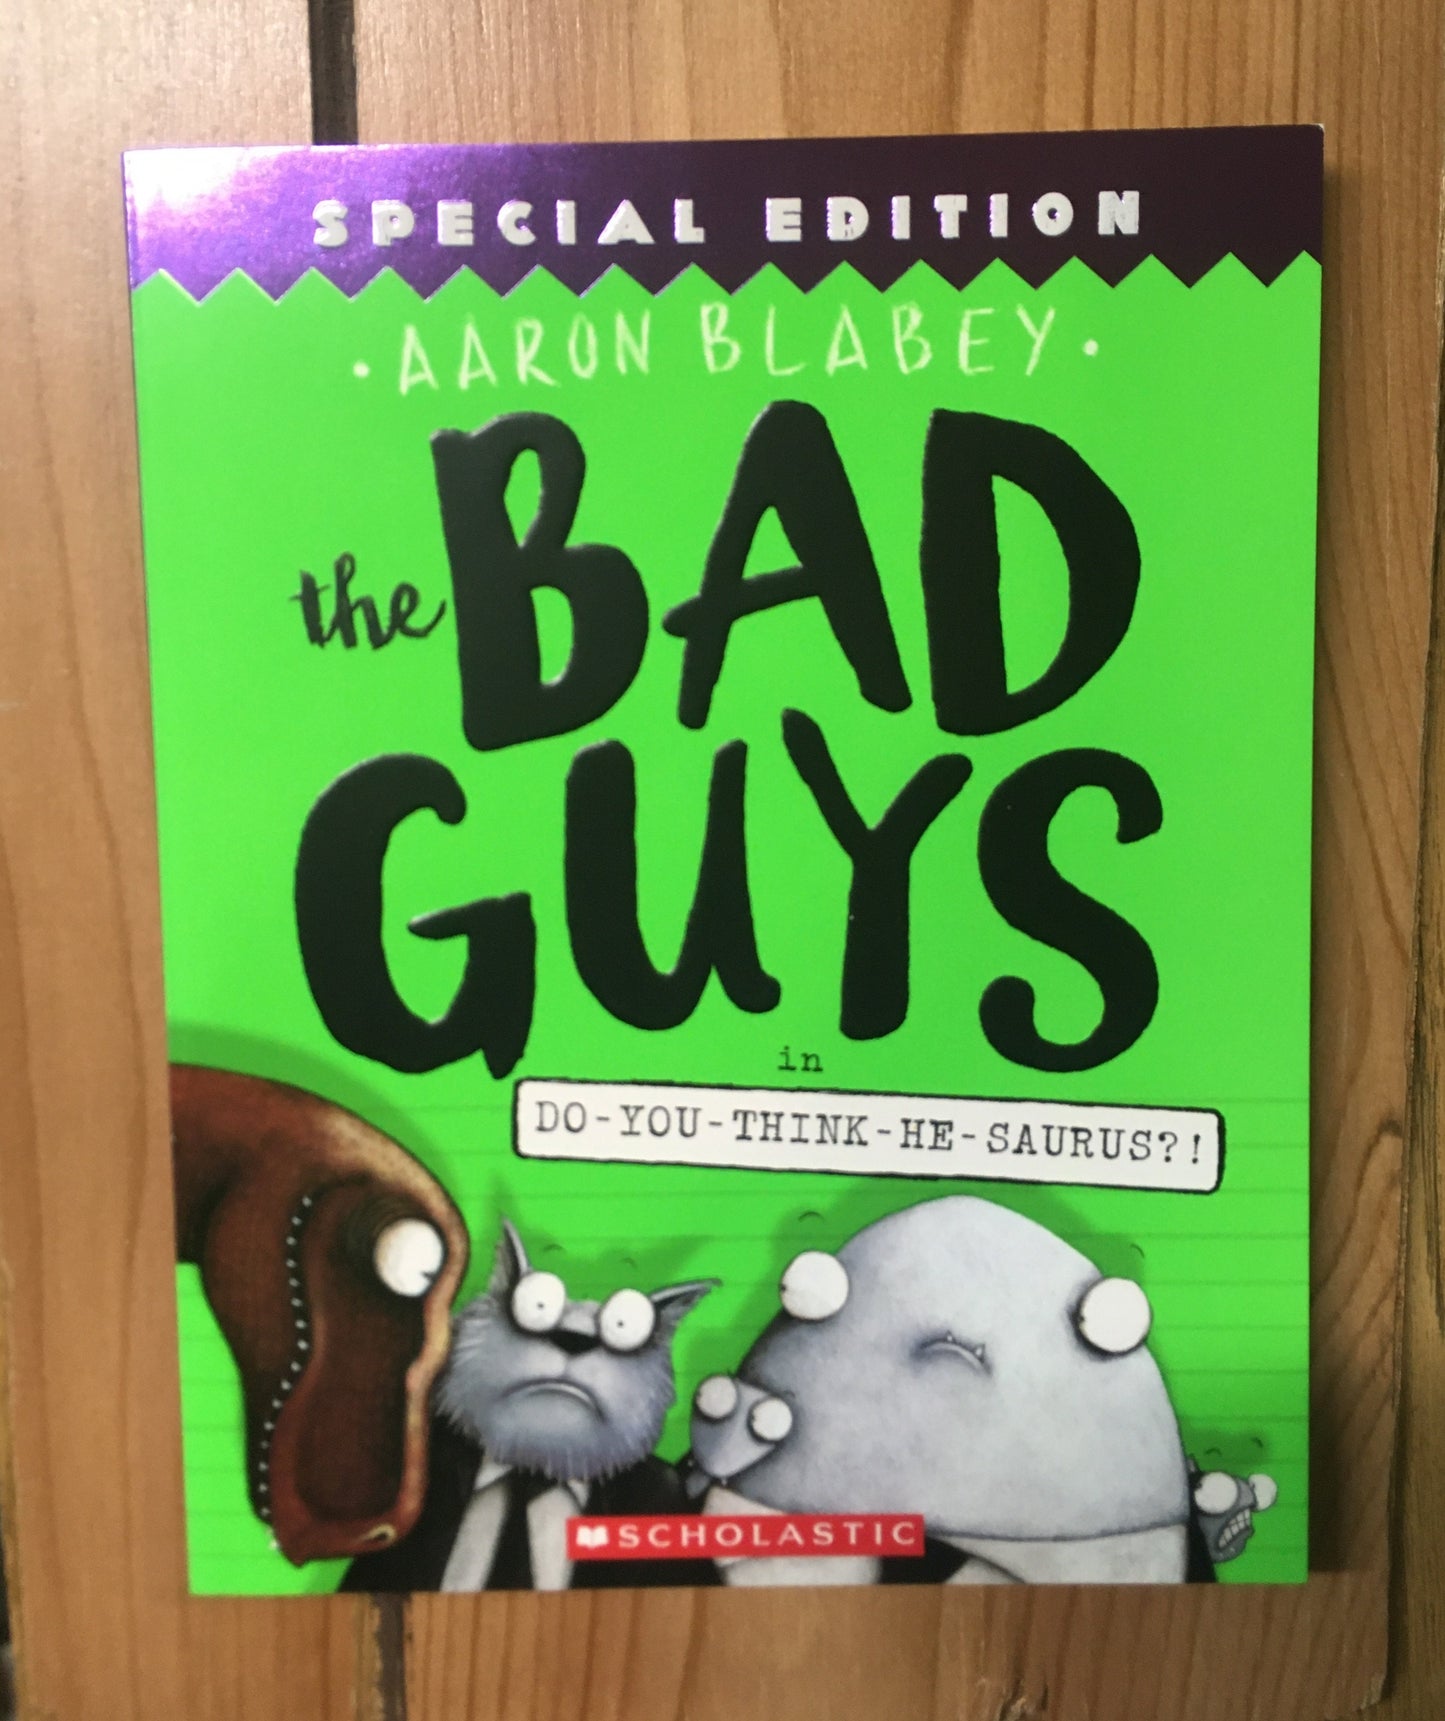 The Bad Guys in Do-You-Think-He-Saurus (#7)